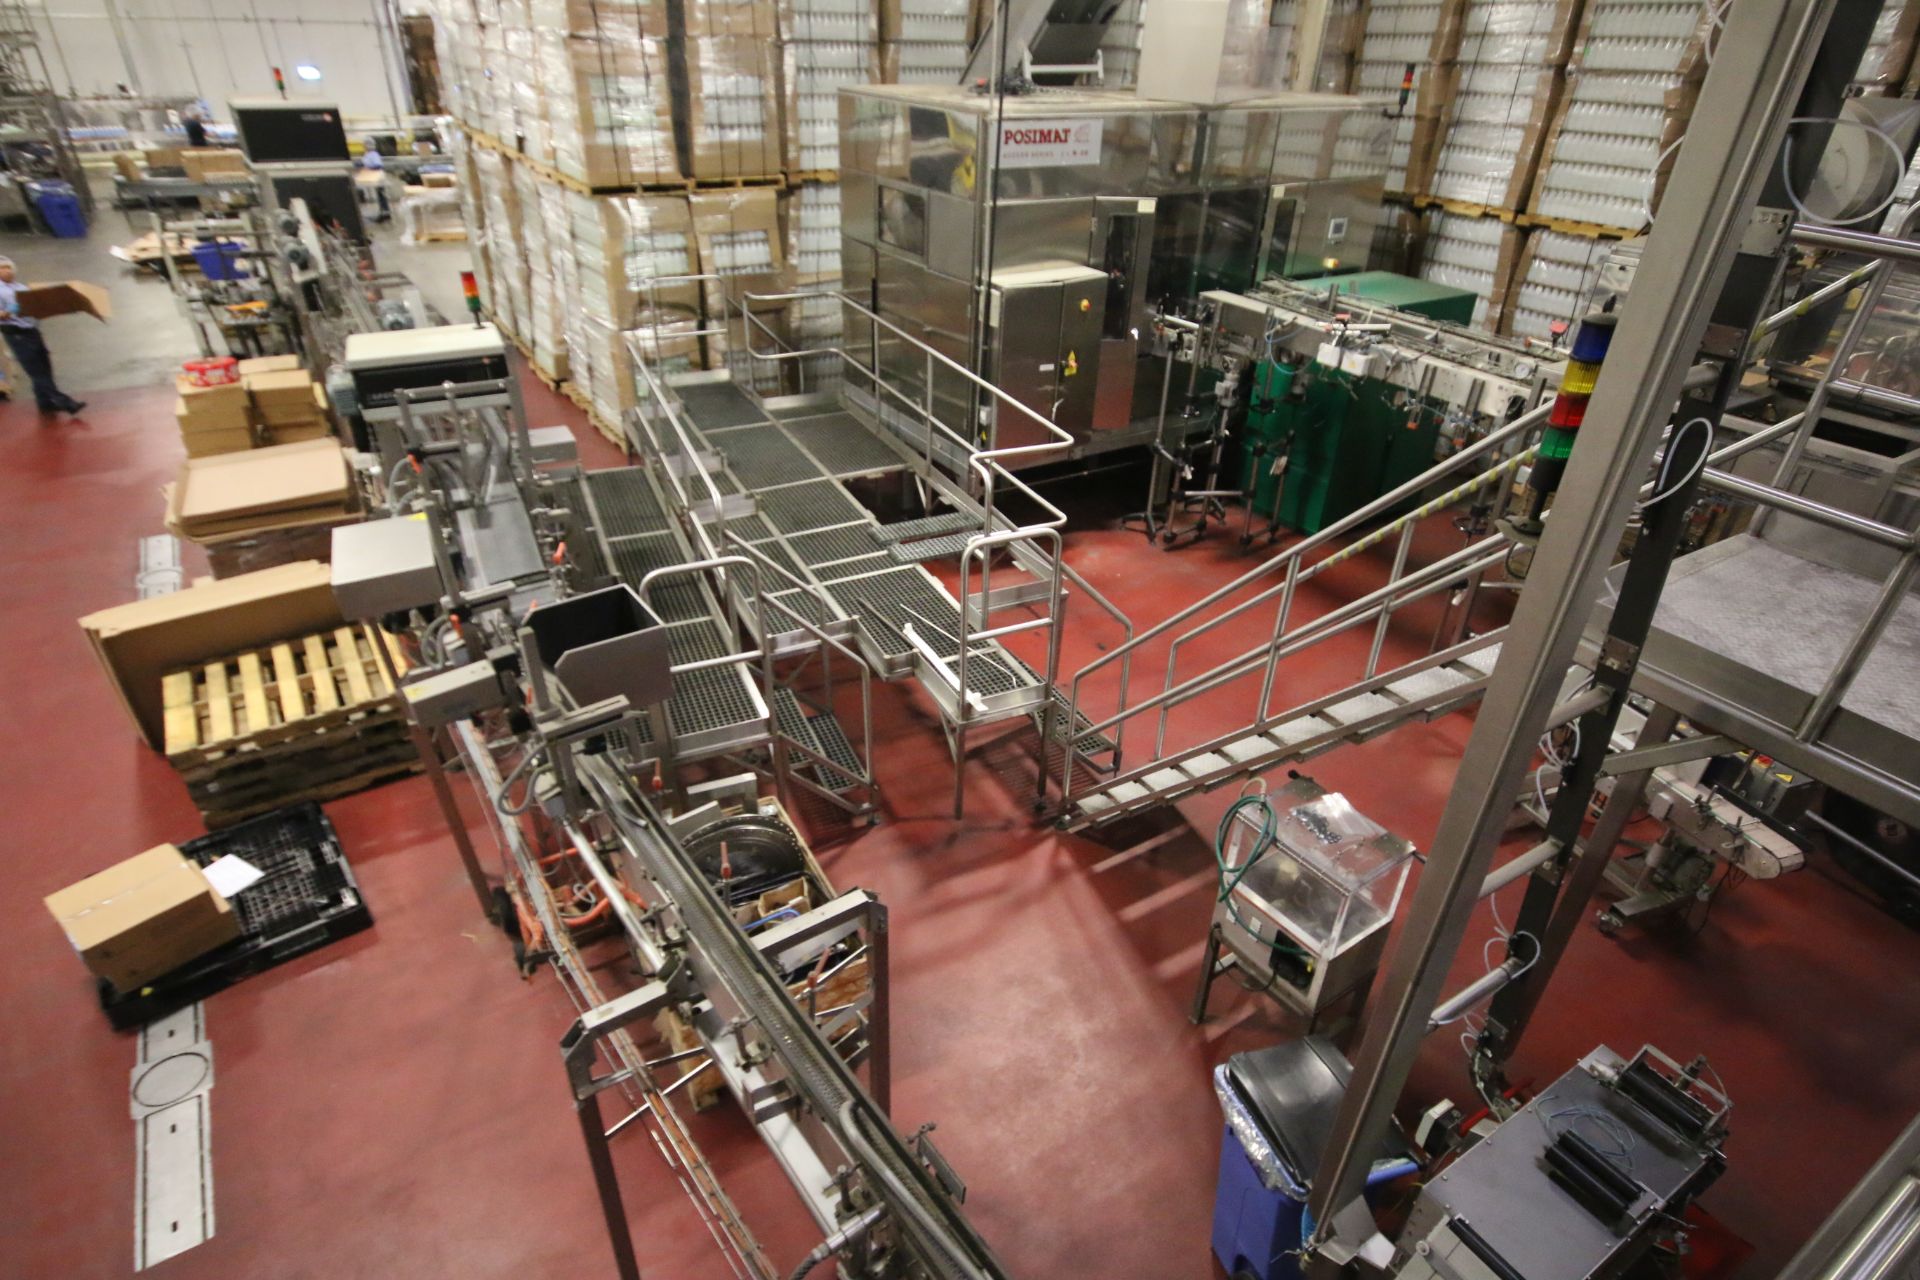 Sentry Aprox. 200' S/S Bottle and Product Conveyor System, Single Filer Section, 7-Bank Control - Image 2 of 6